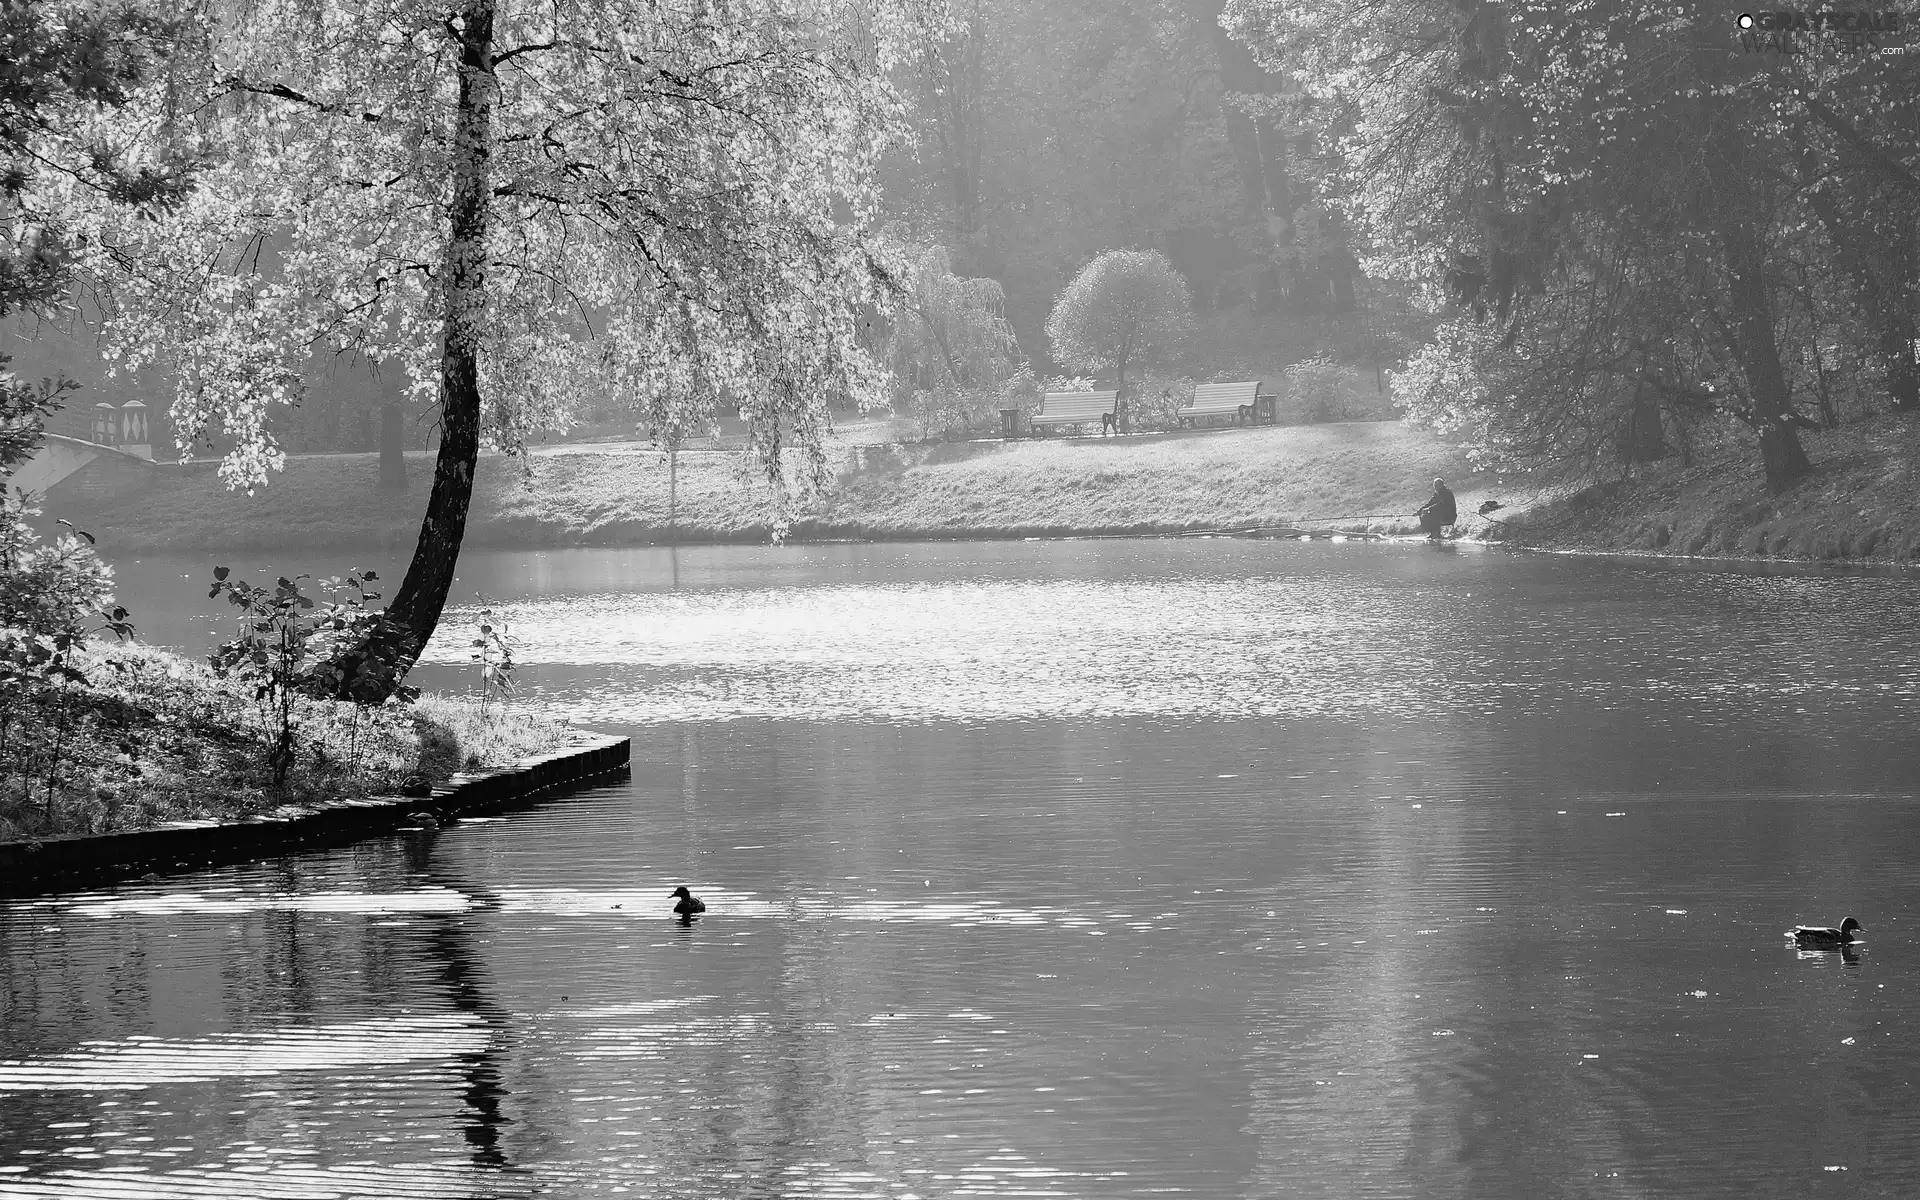 ducks, Park, viewes, autumn, trees, water